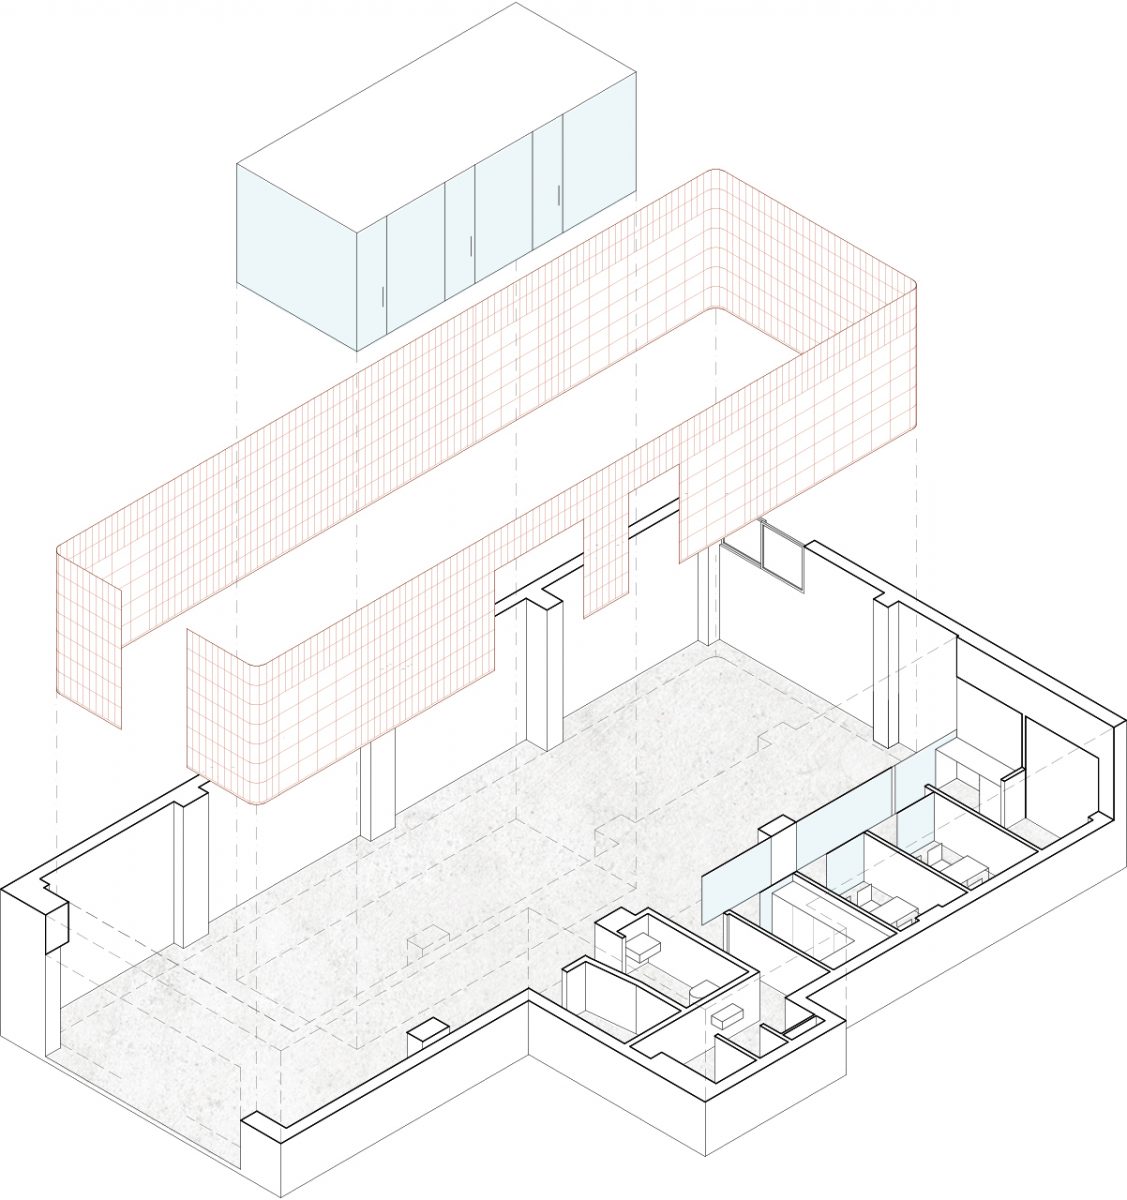 Axonometric view of the clinic